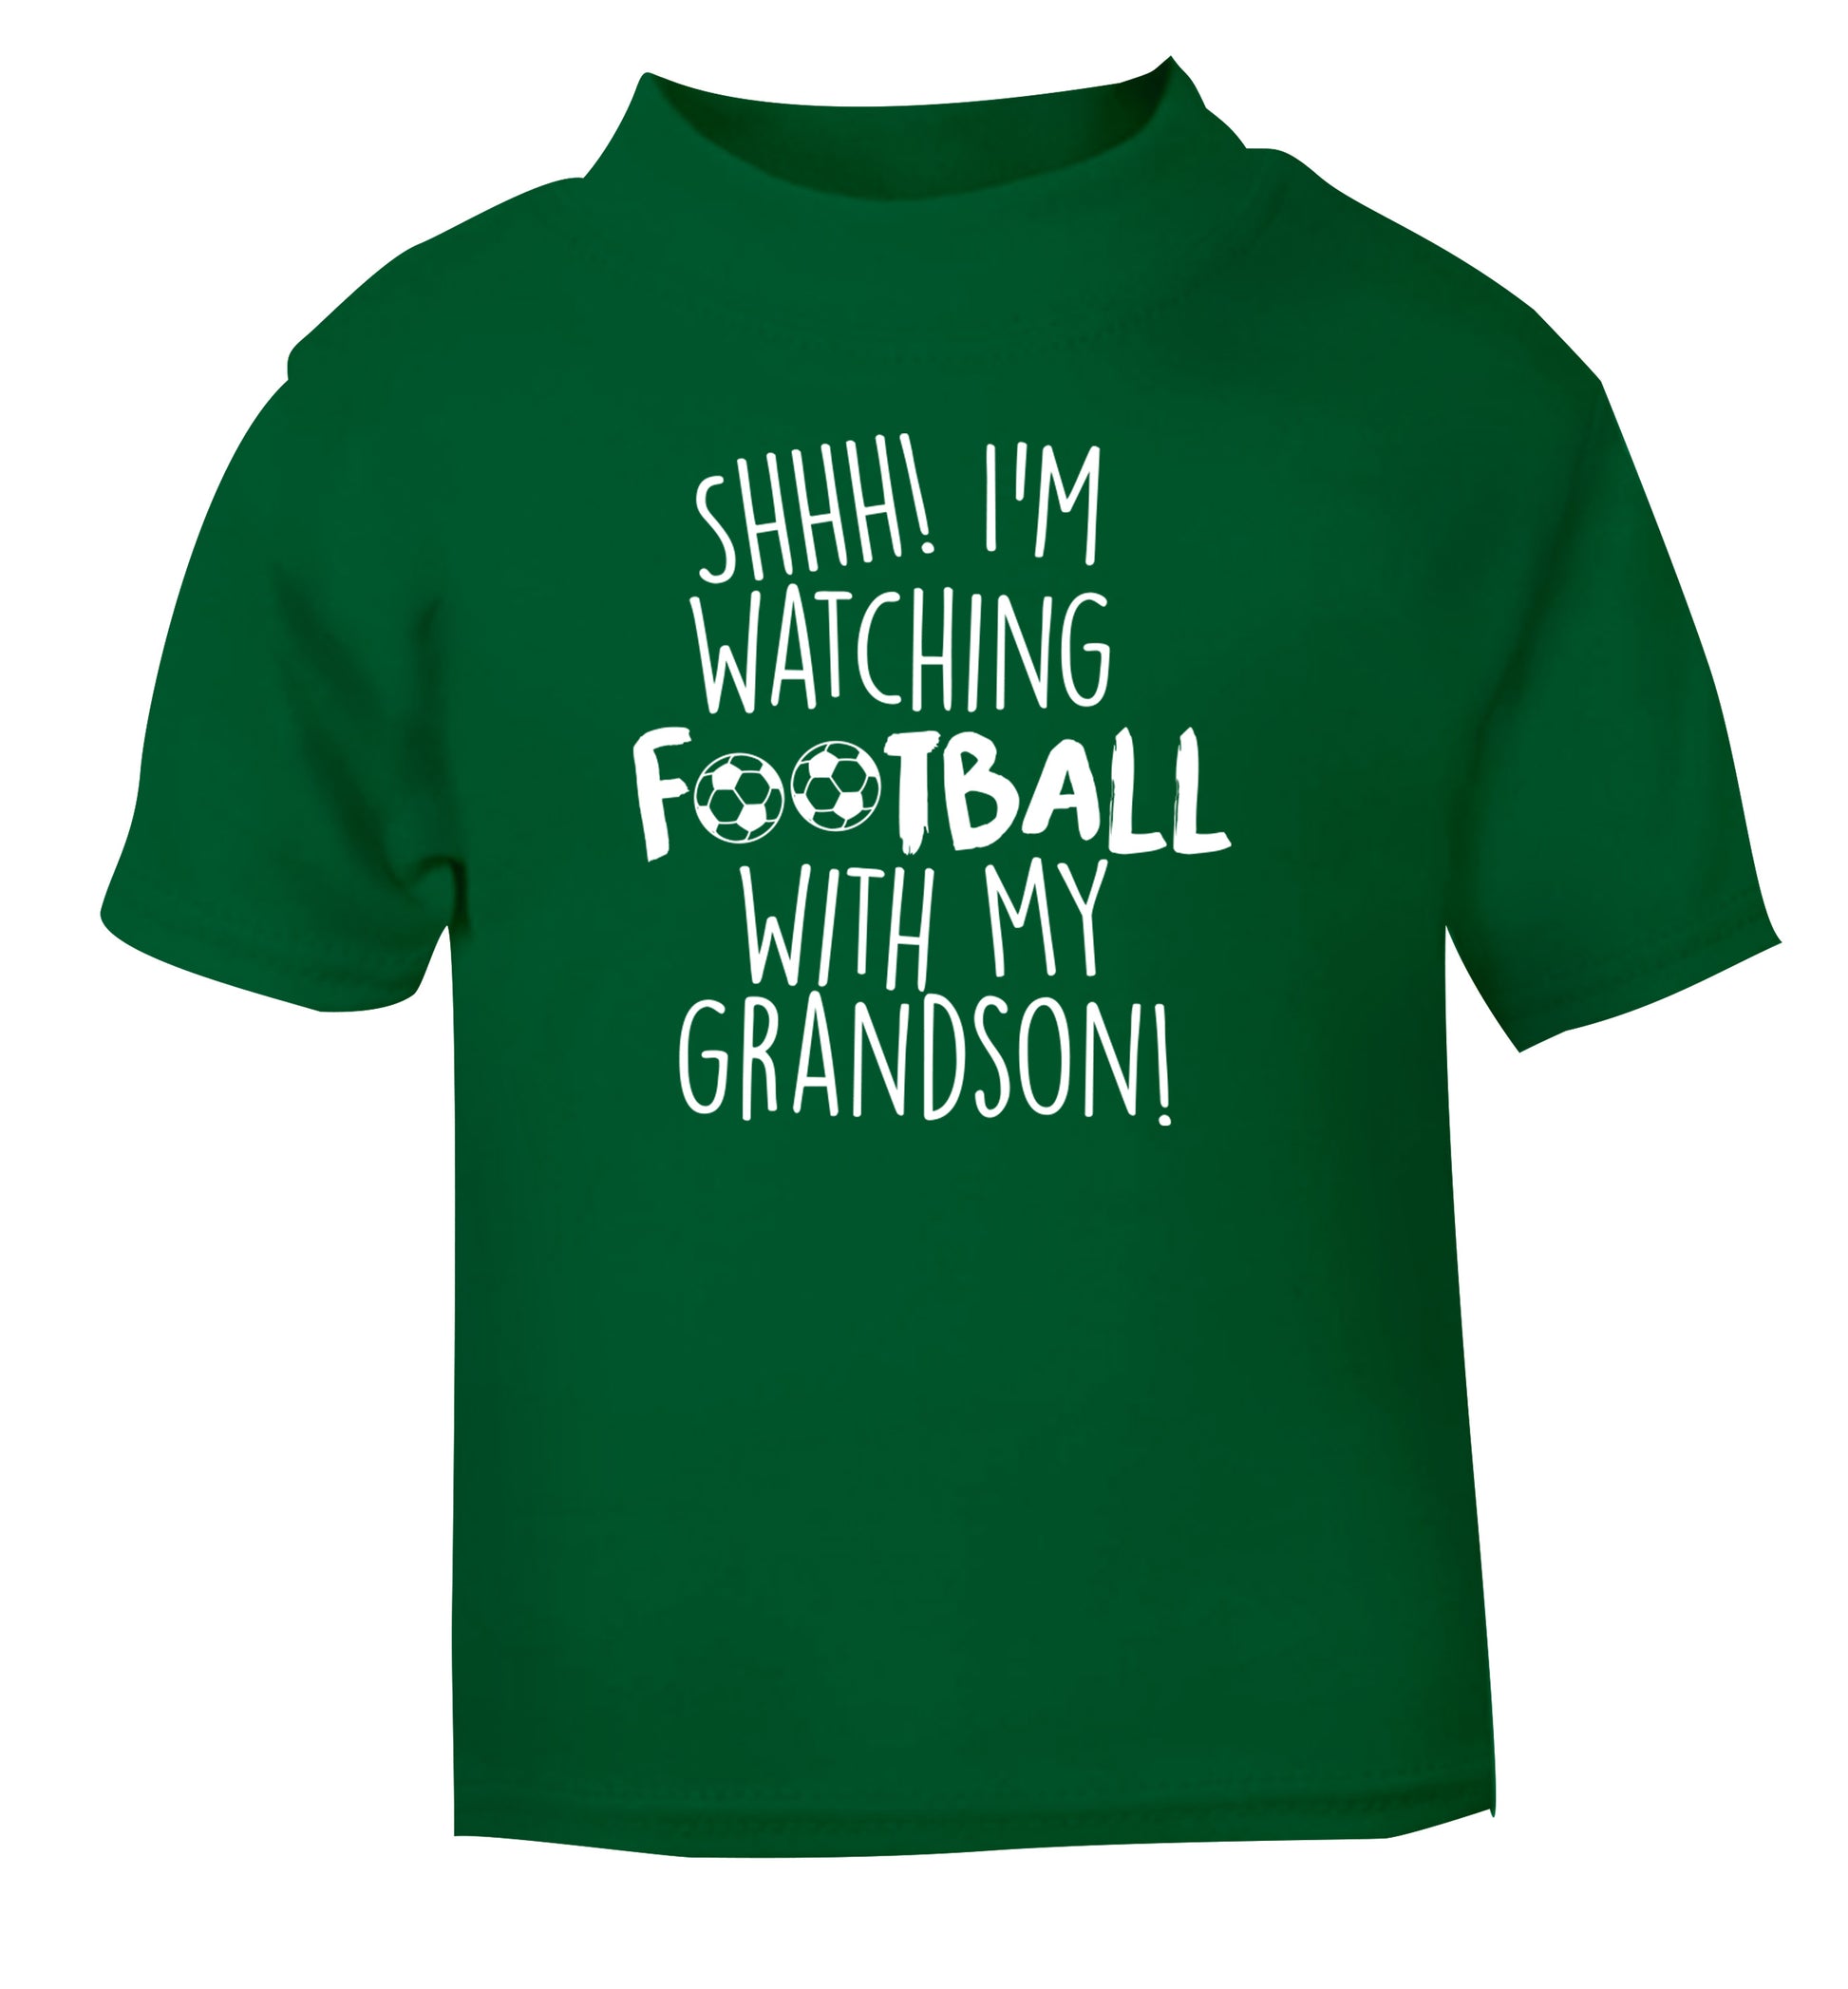 Shhh I'm watching football with my grandson green Baby Toddler Tshirt 2 Years